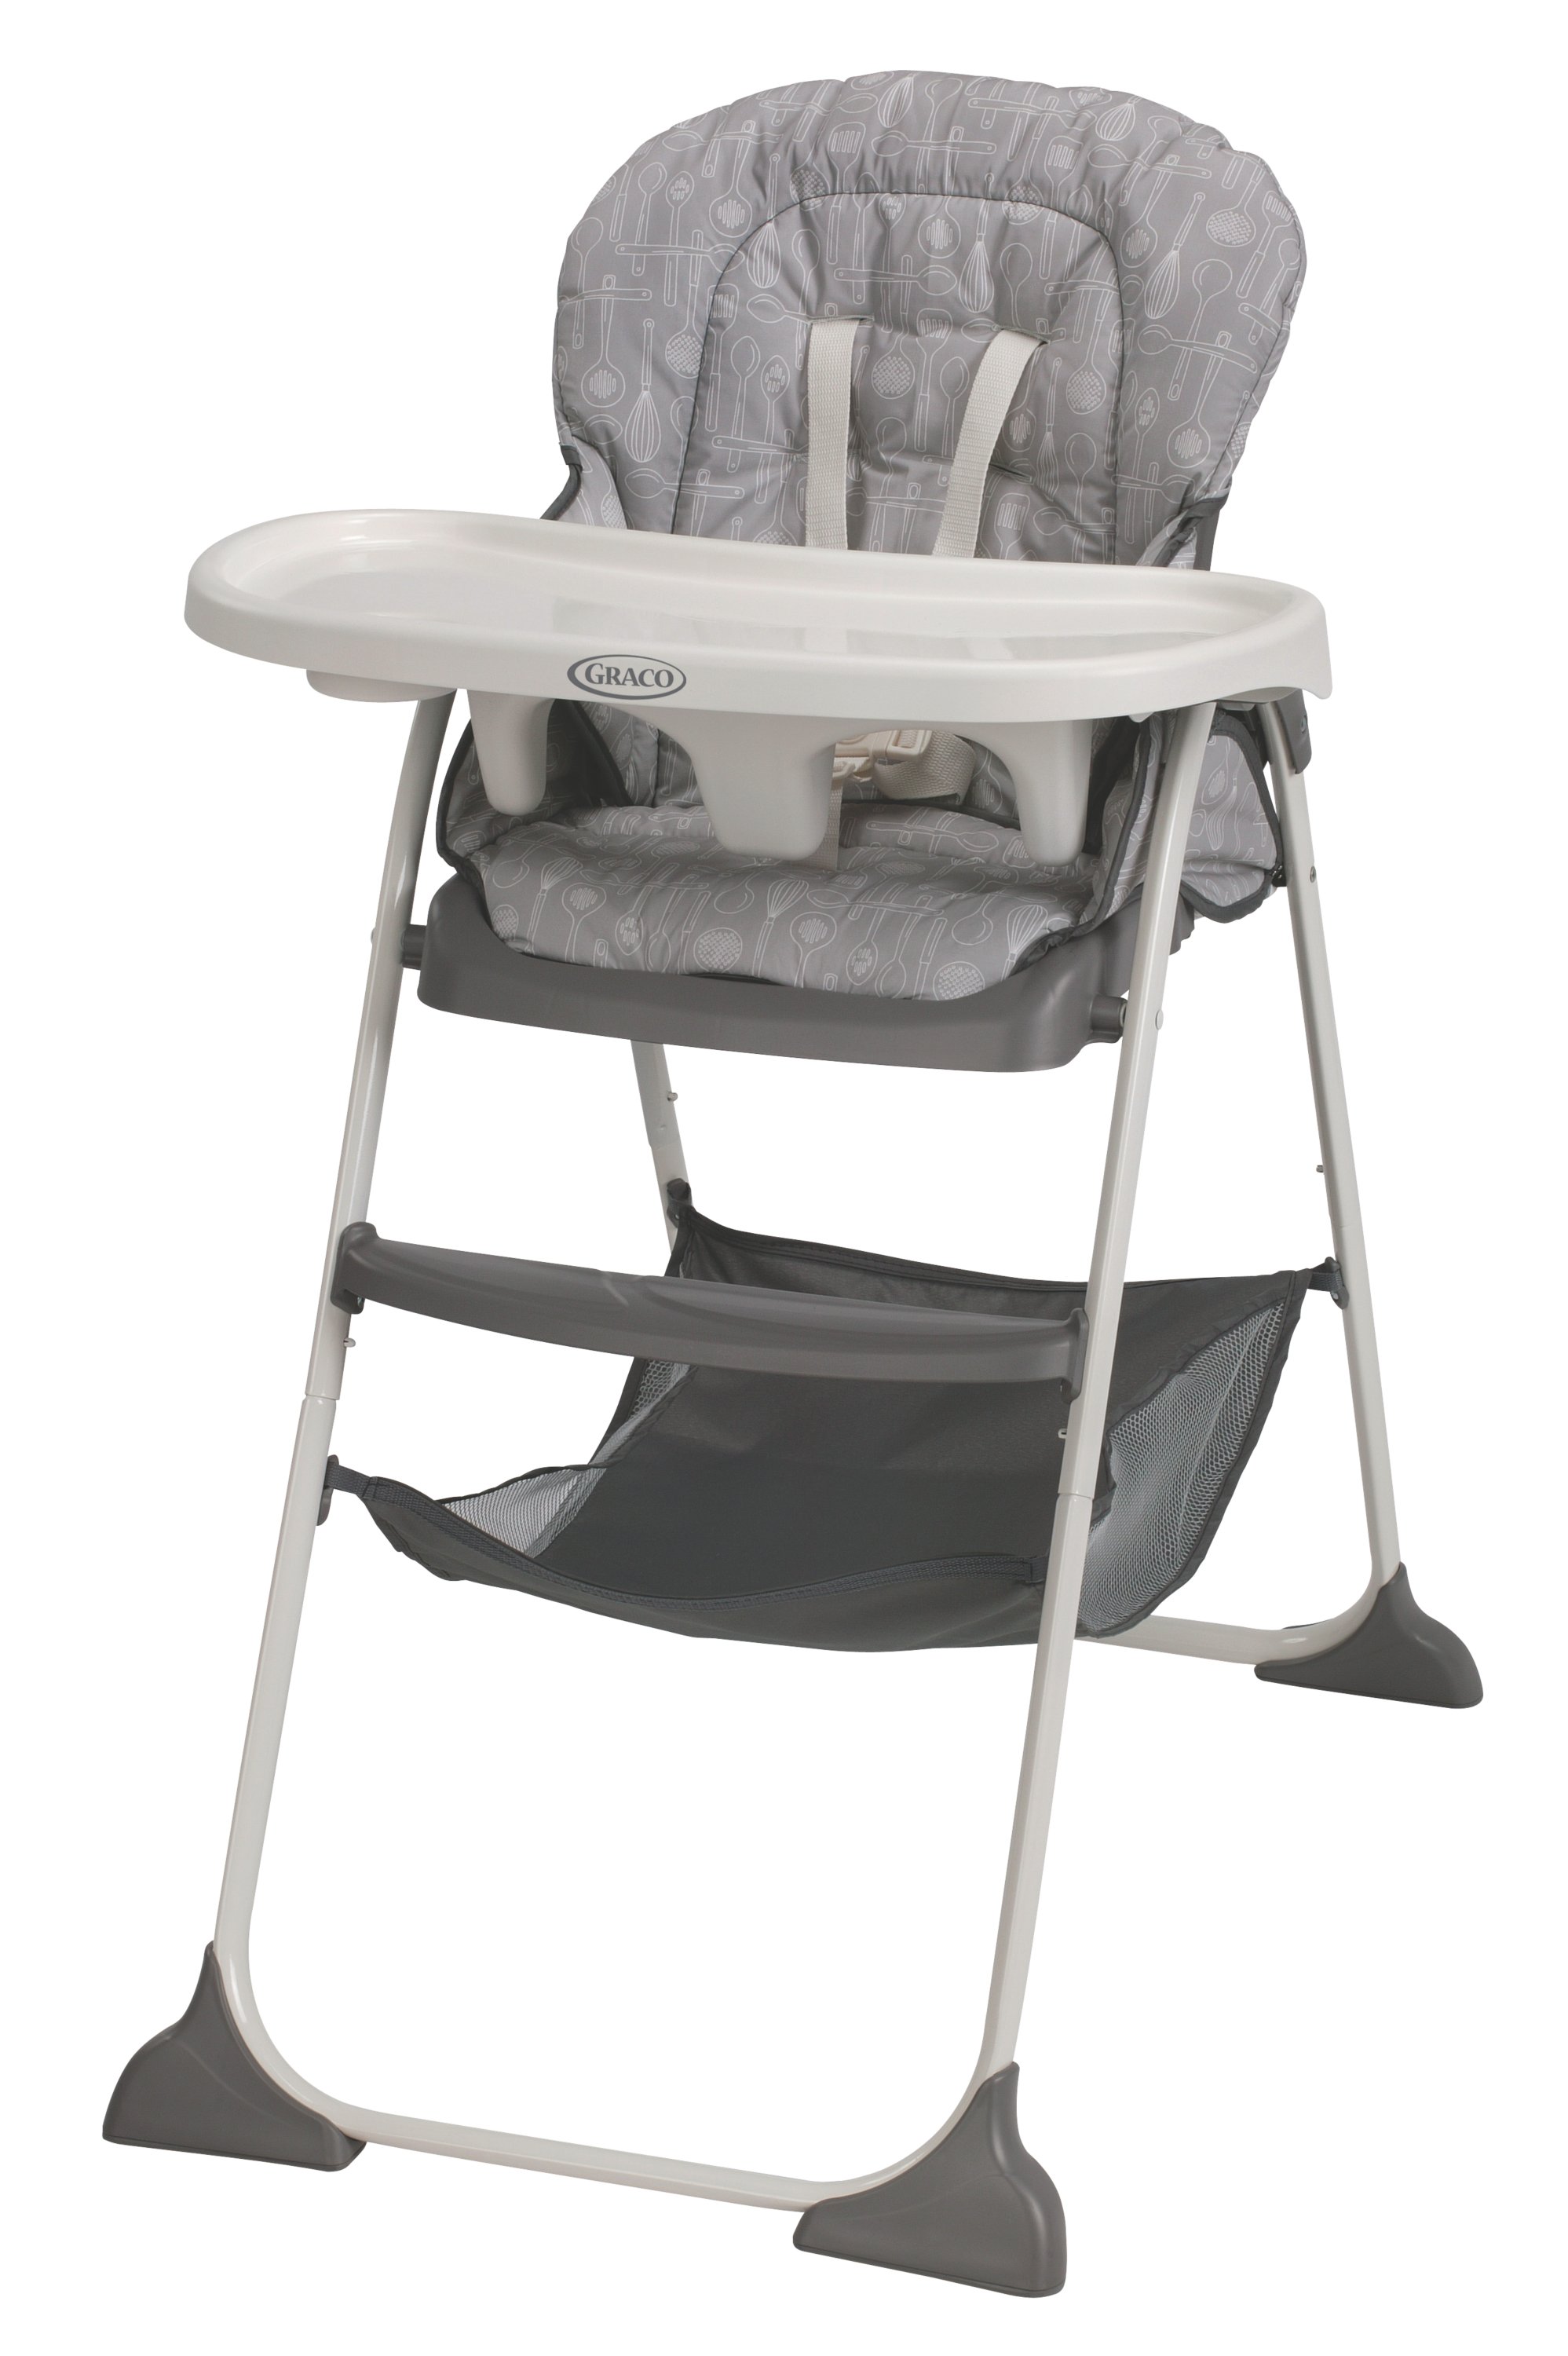 Graco Snack N’ Stow Compact Highchair Block Alphabet